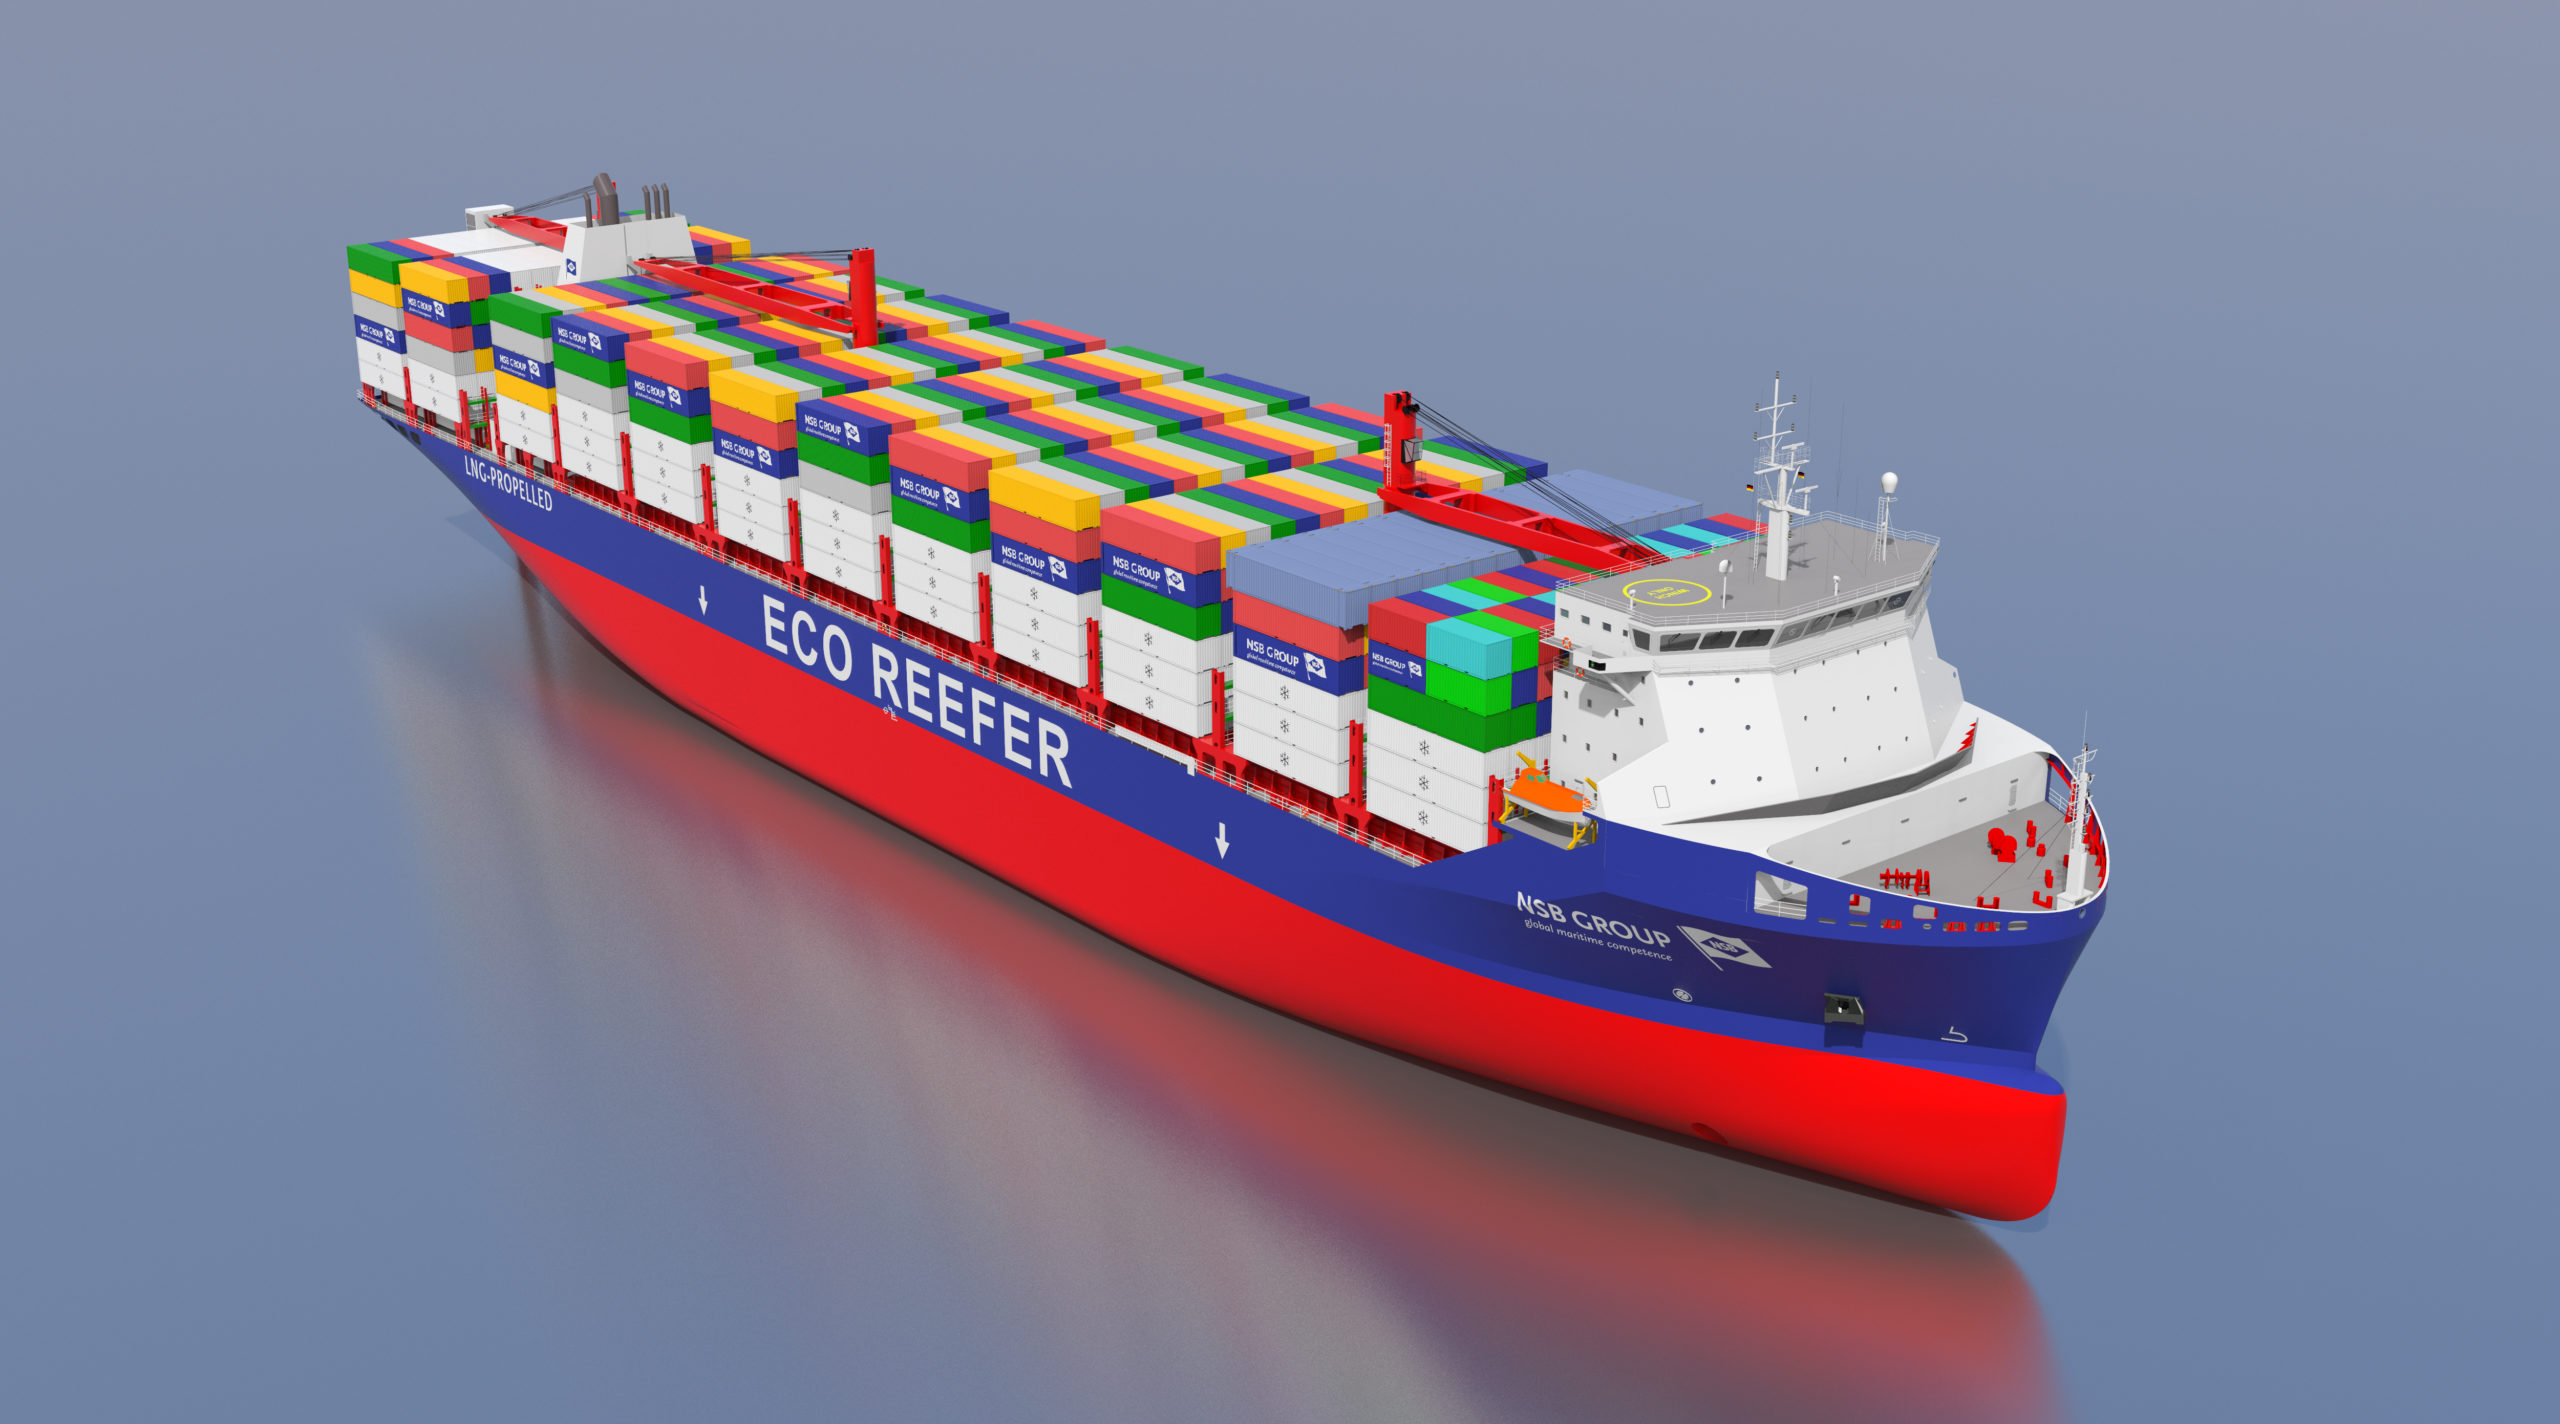 Moving forward environmental-friendly propulsion for vessels